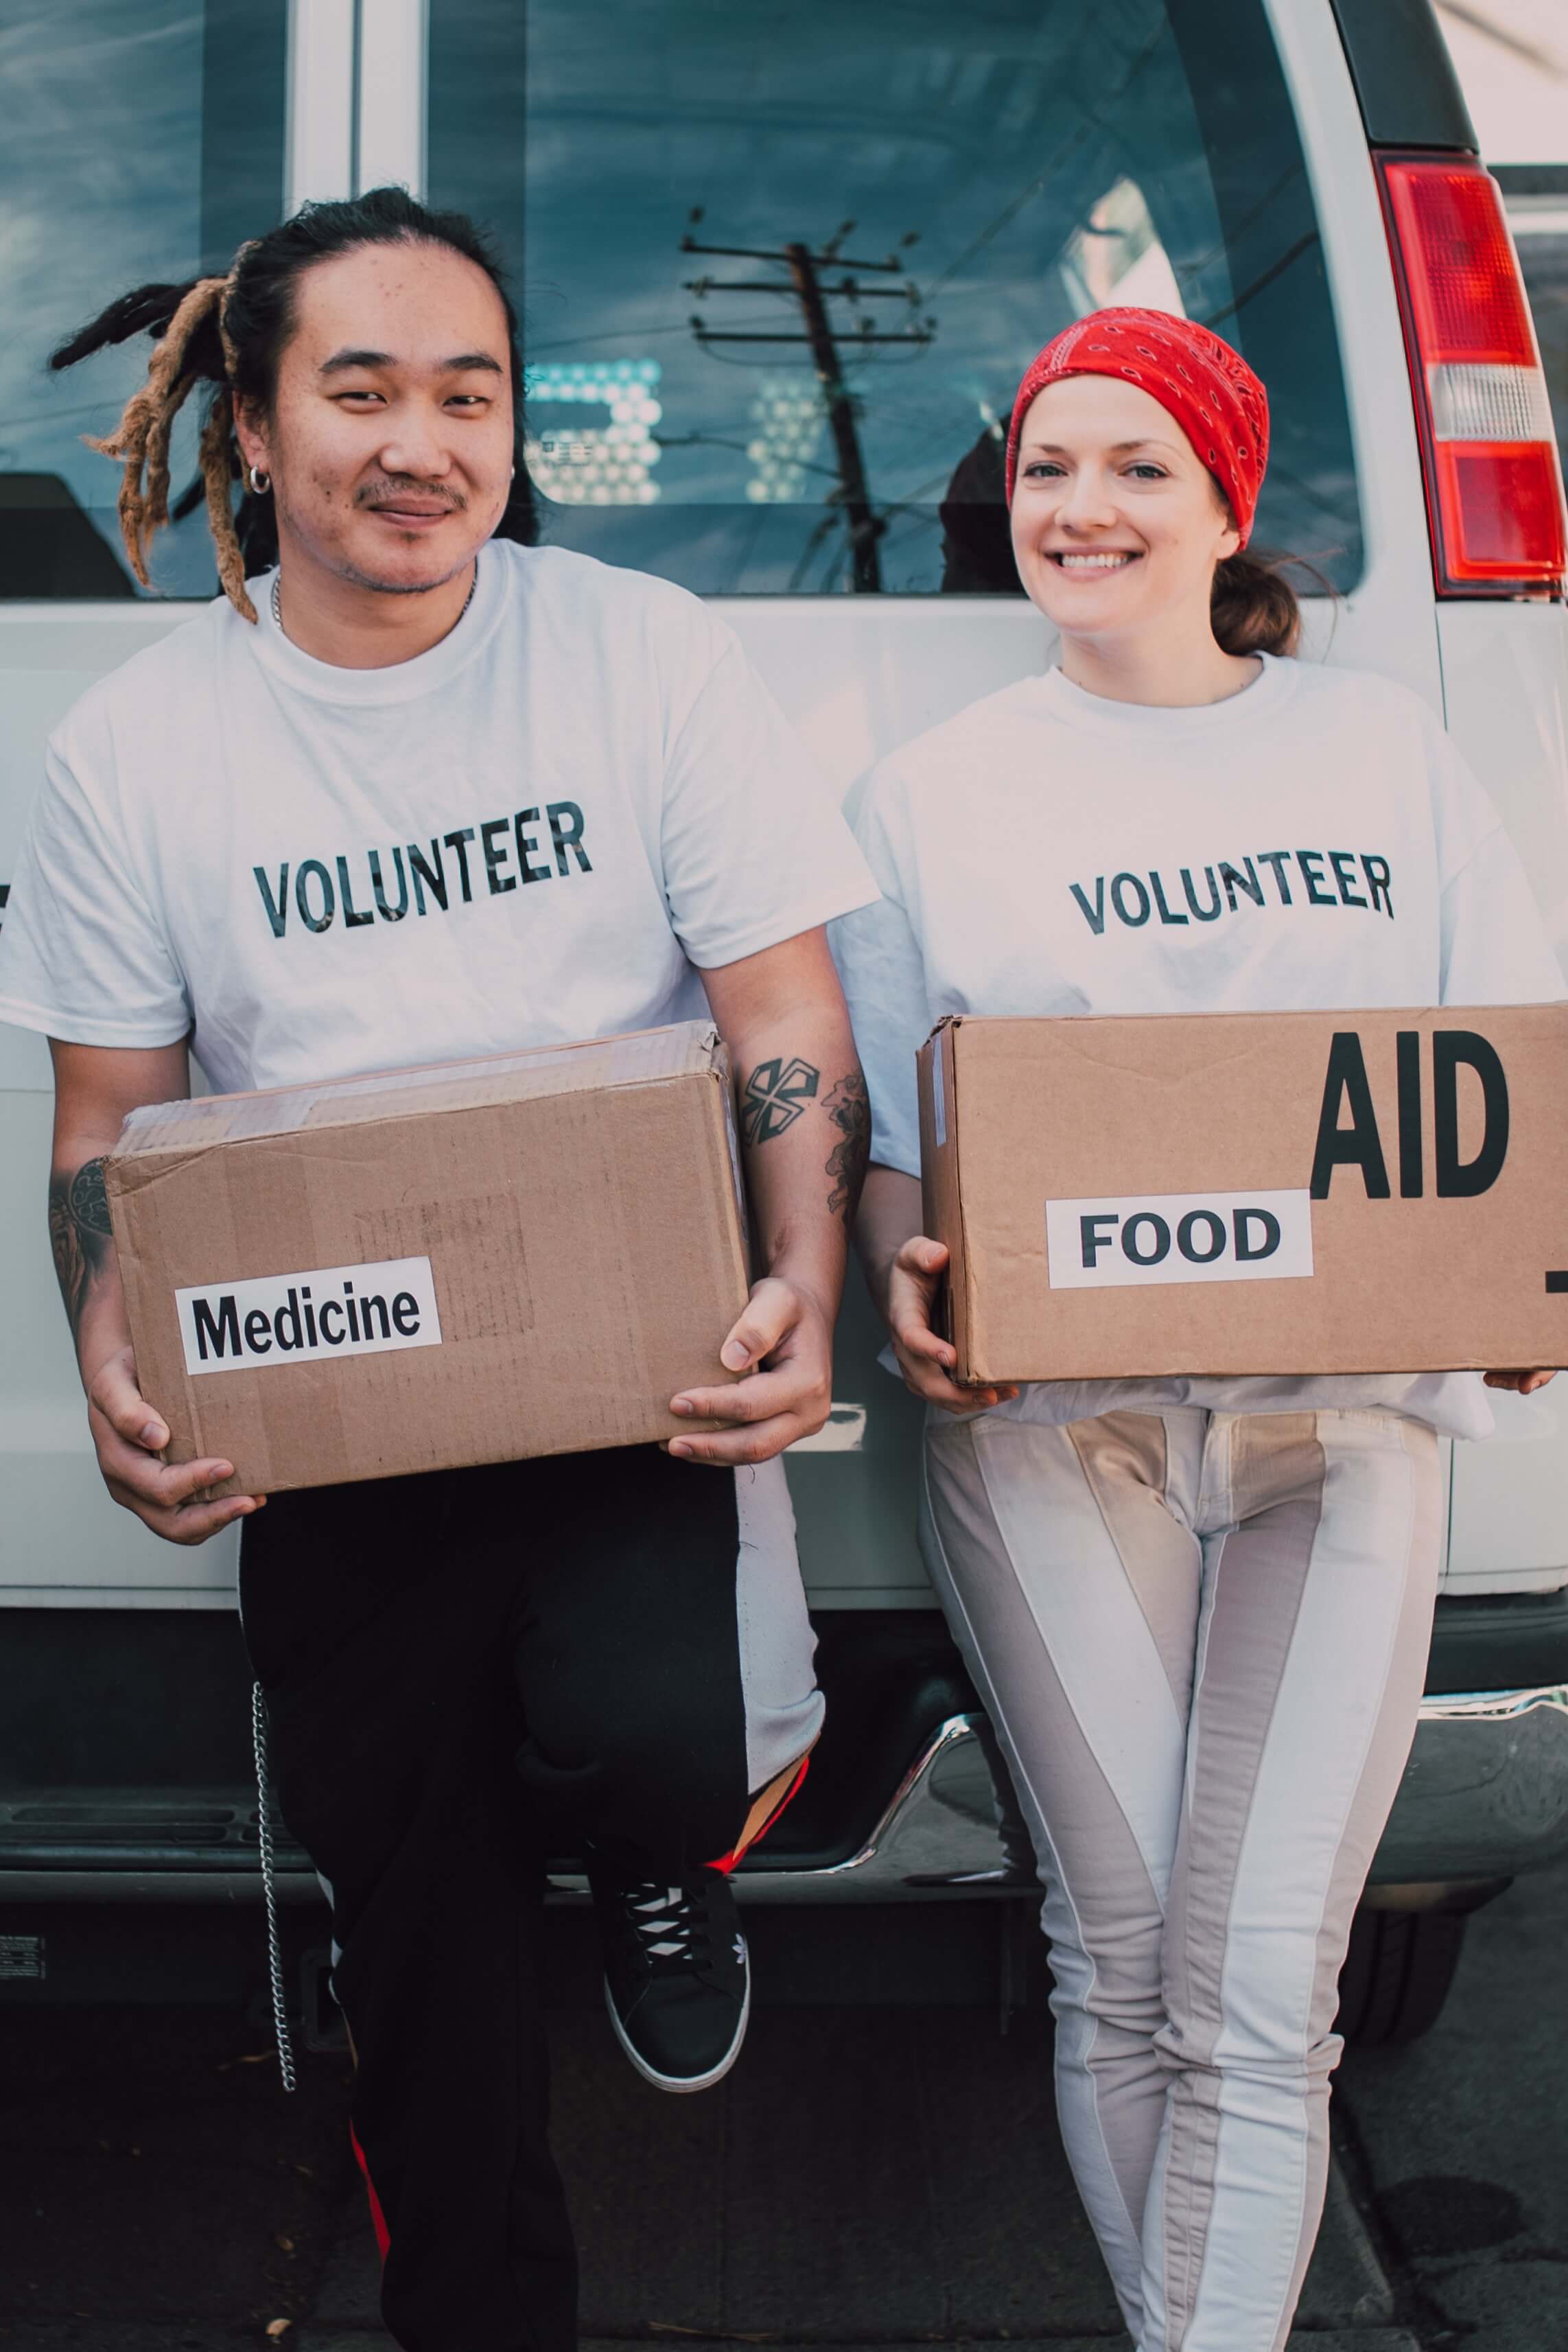 Two people holding boxes bringing aid